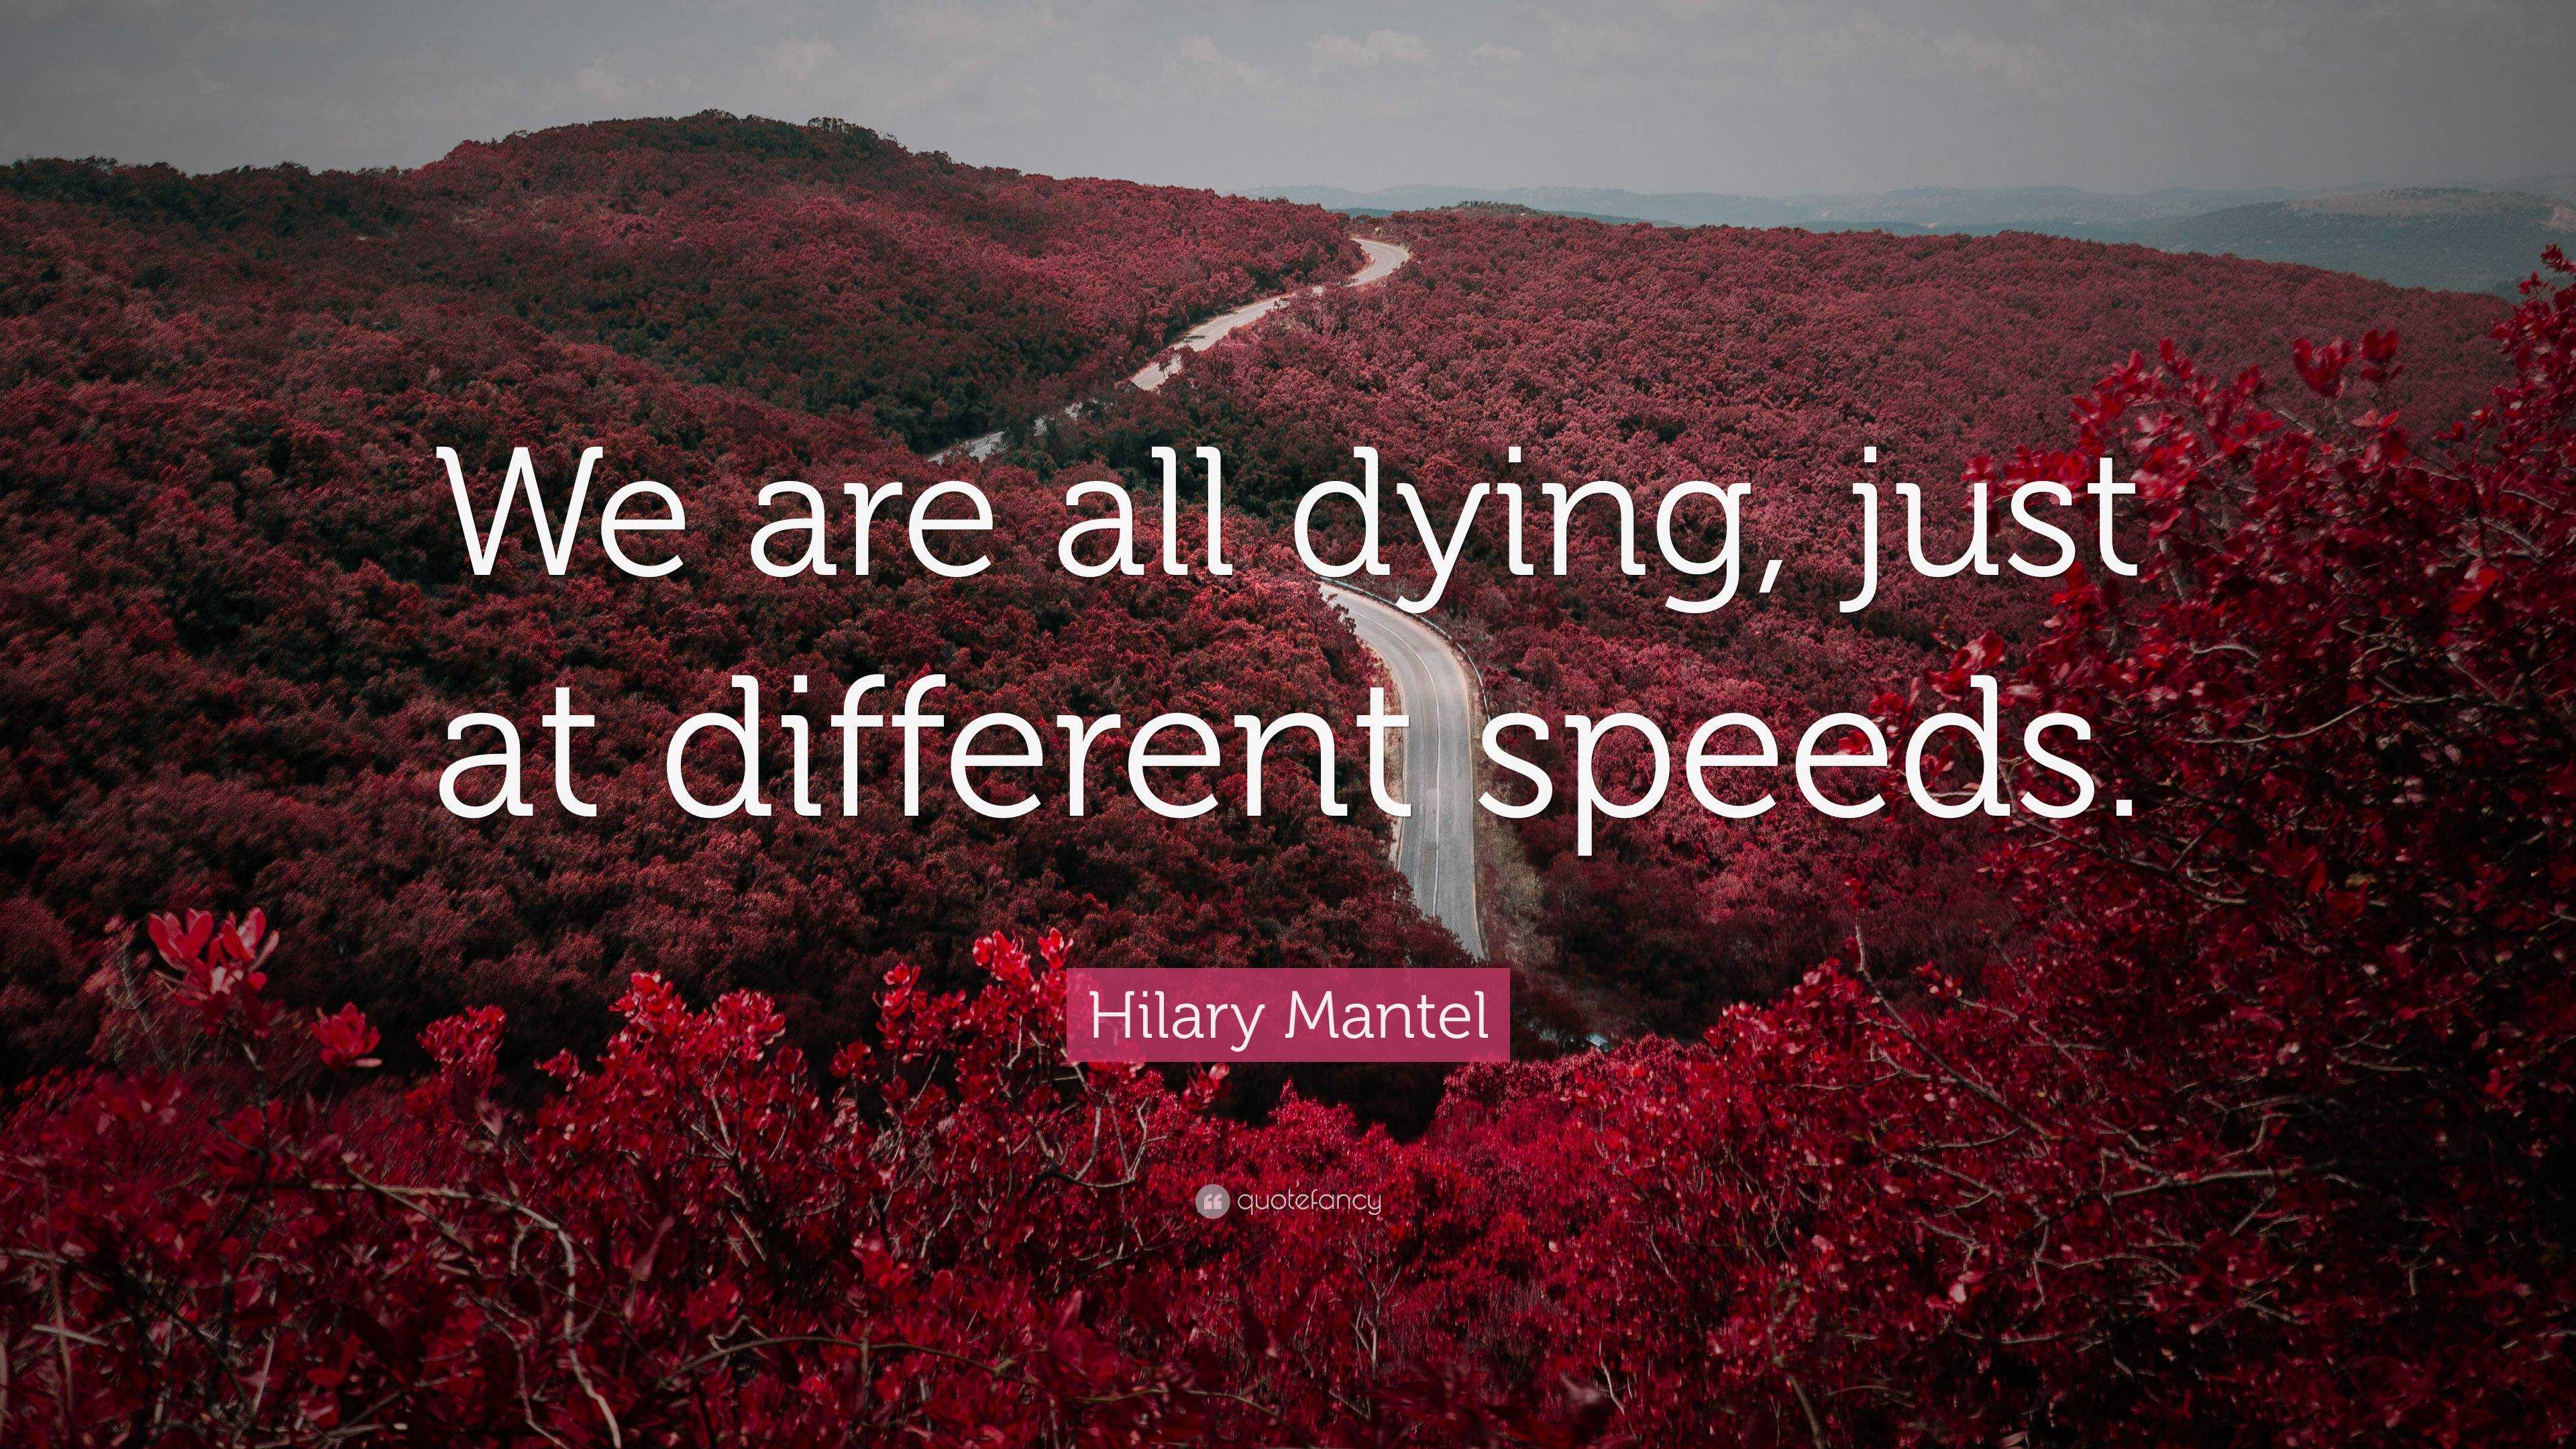 Hilary Mantel Quote: “We are all dying, just at different speeds.”